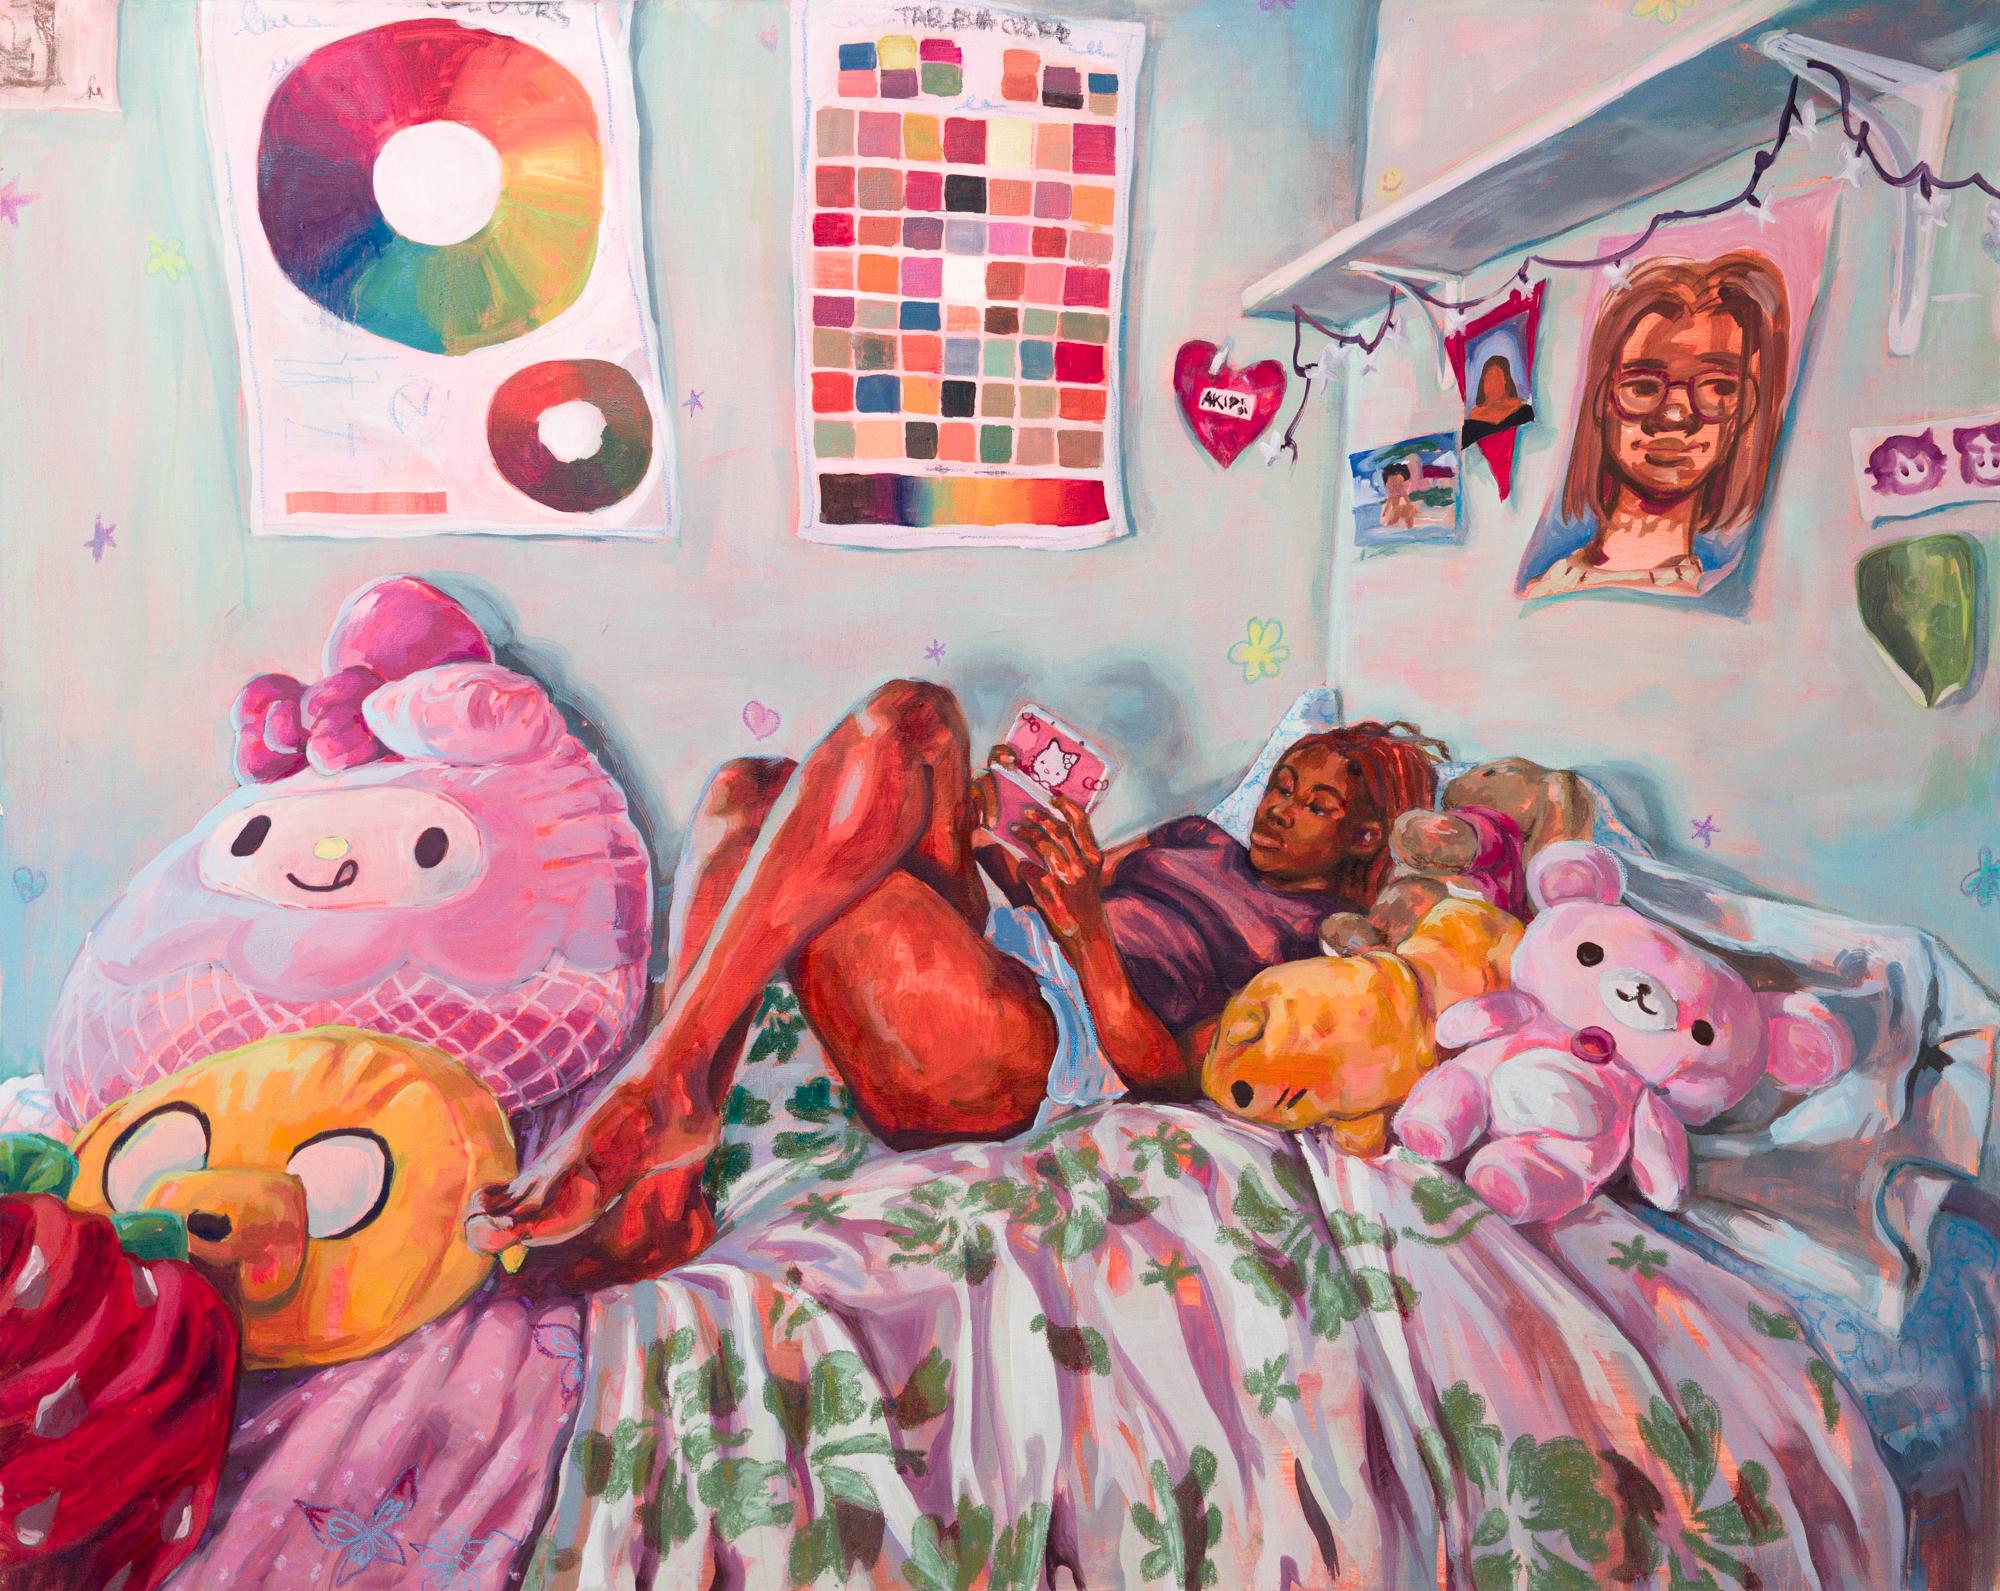 Akira Gordon Portrait Painting - "Surrounded By Fuzzy Friends", Human Figure, Bedroom, Stuffed animals, games